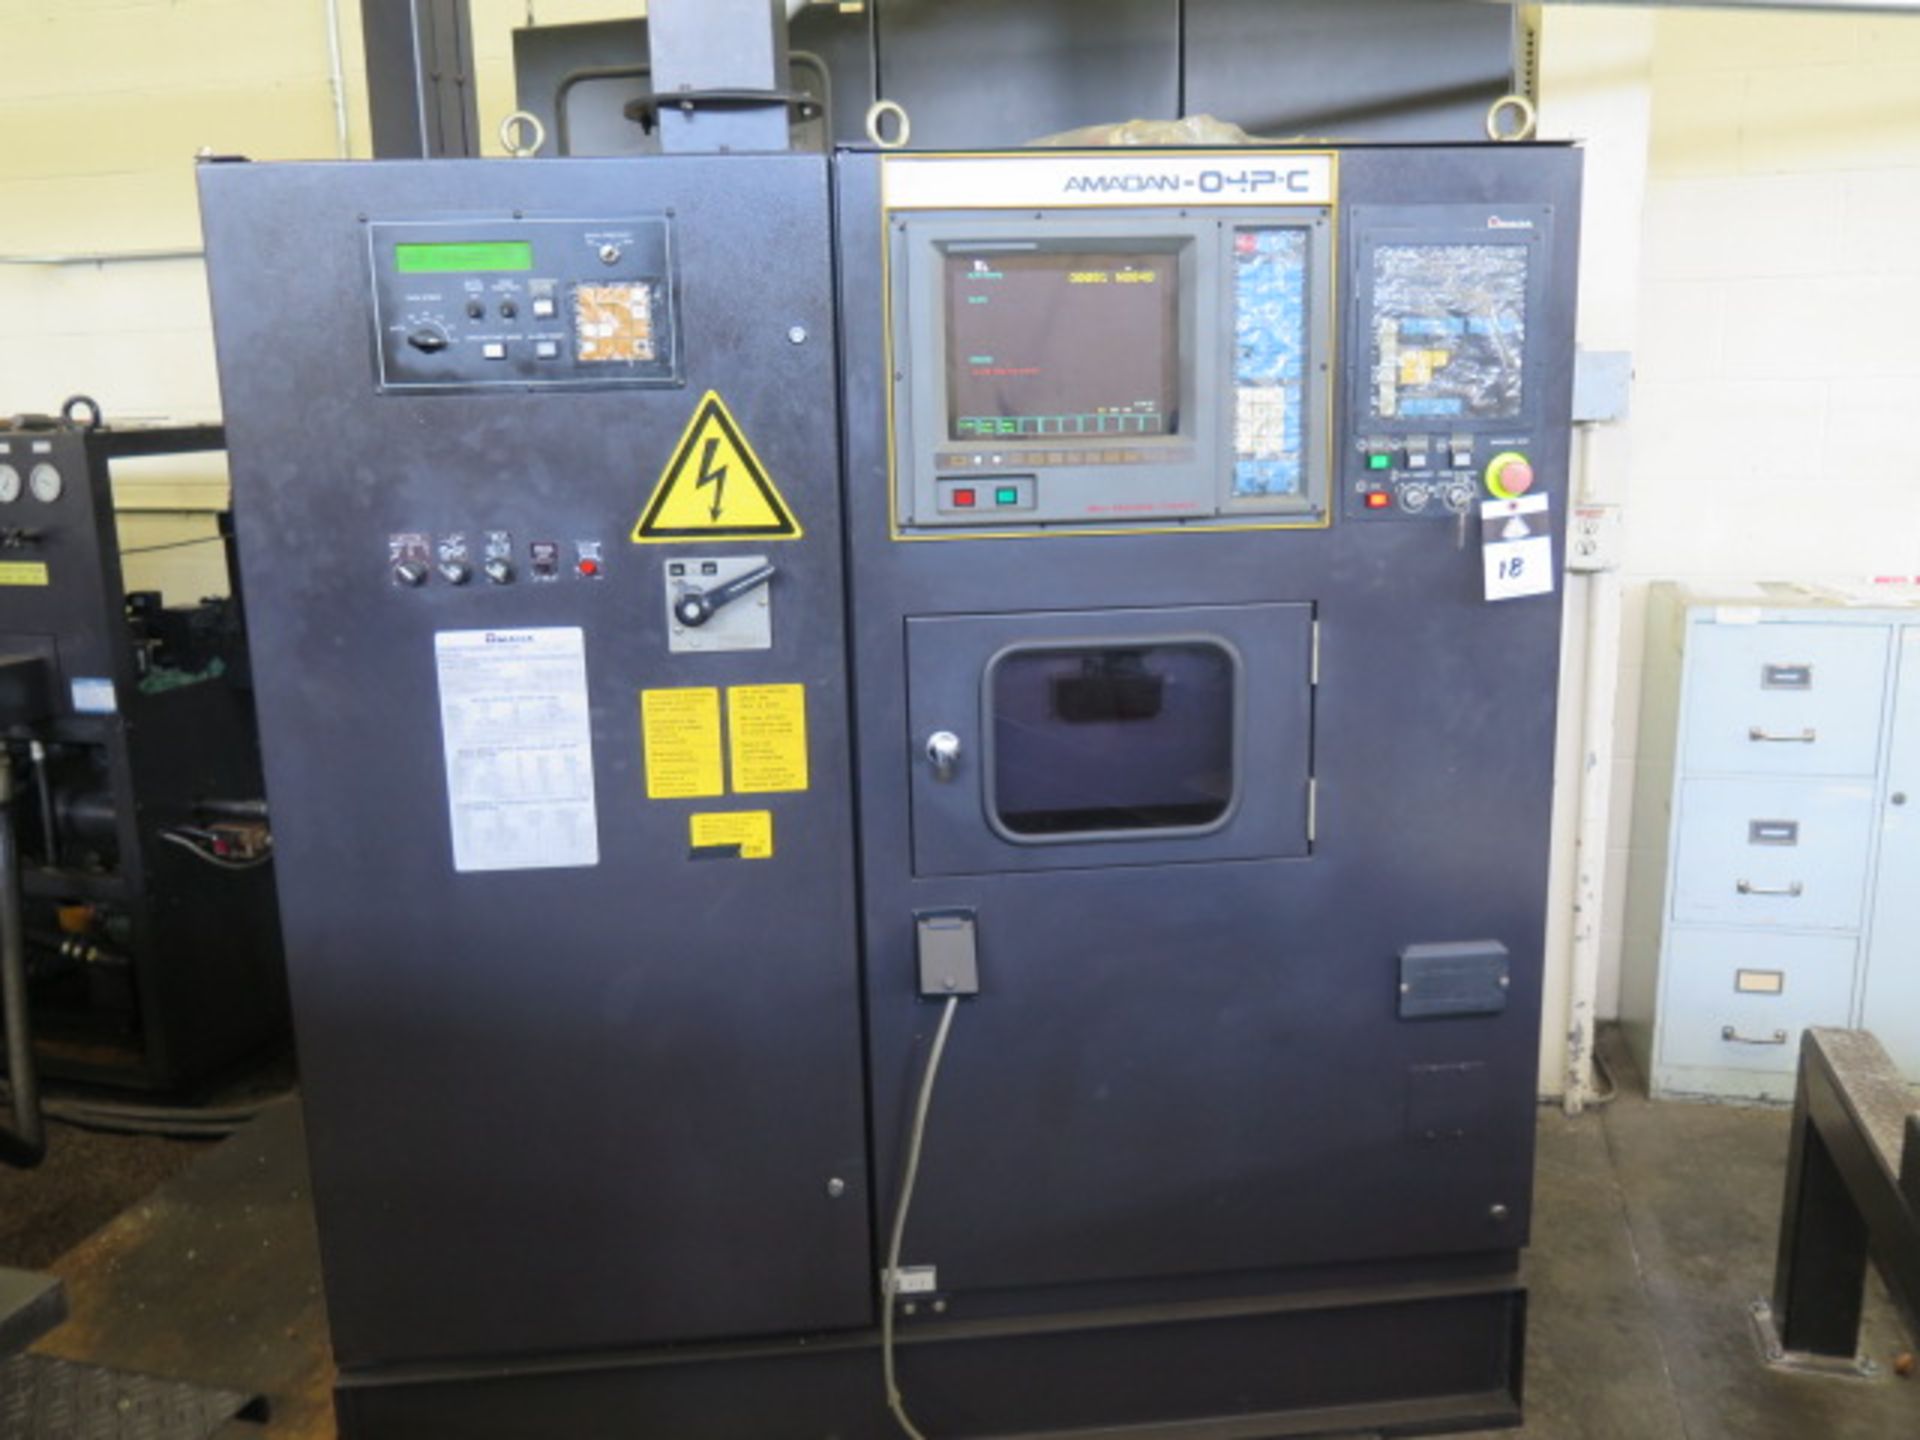 Amada VIPROS 357 30-Ton CNC Turret Punch Cell s/n 35710664 w/ 04P-C Controls, 58-Station, SOLD AS IS - Image 14 of 37